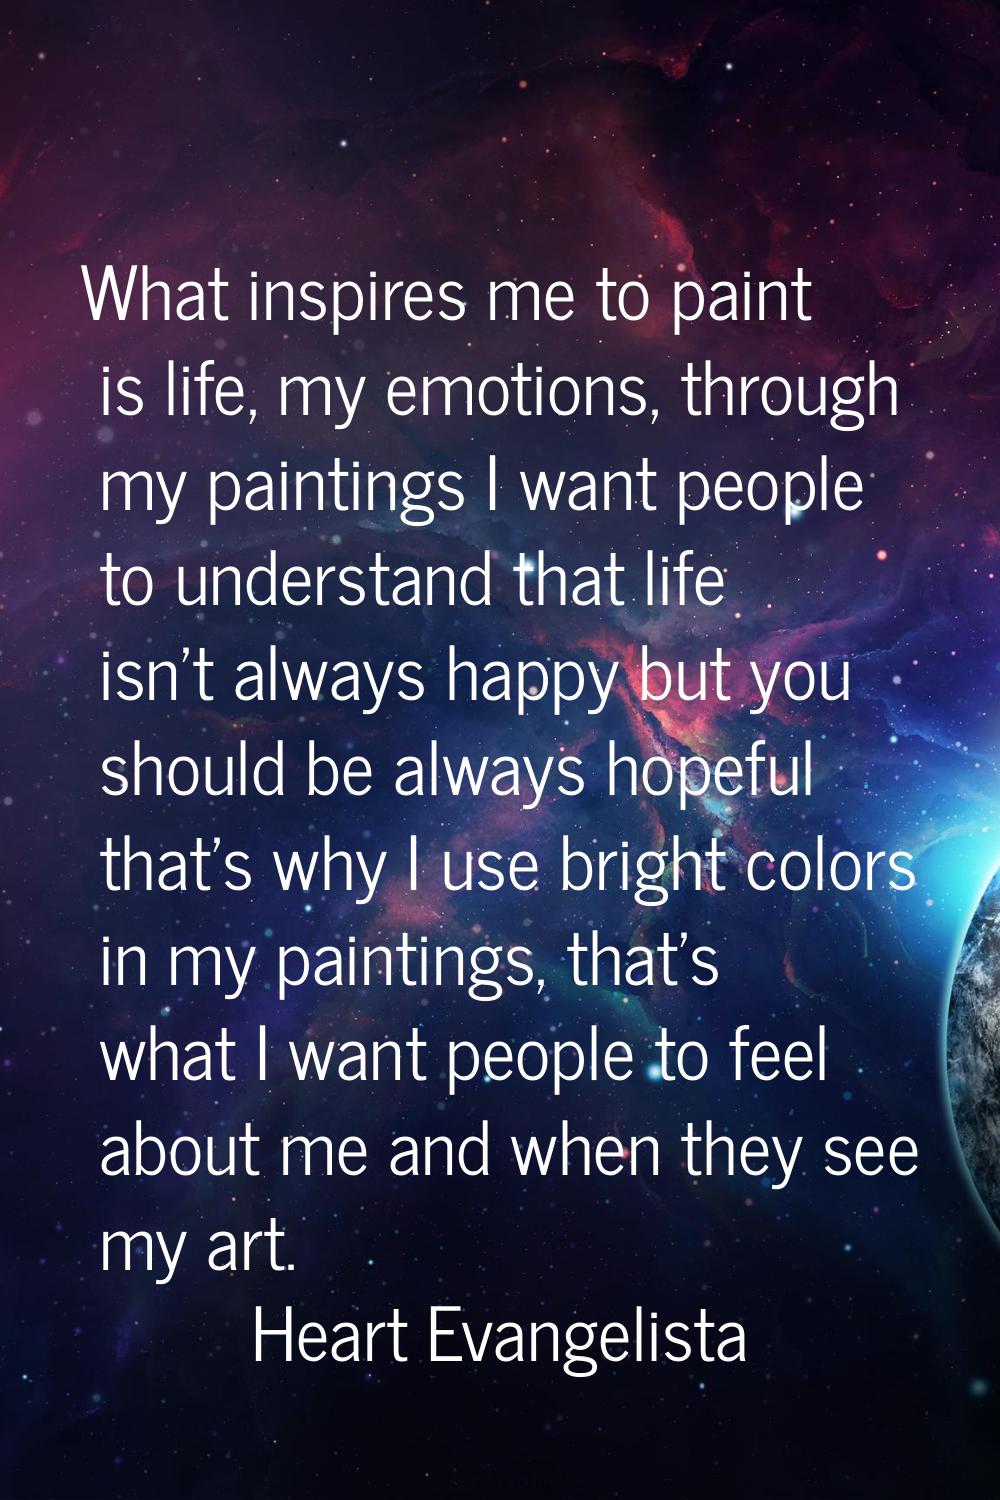 What inspires me to paint is life, my emotions, through my paintings I want people to understand th